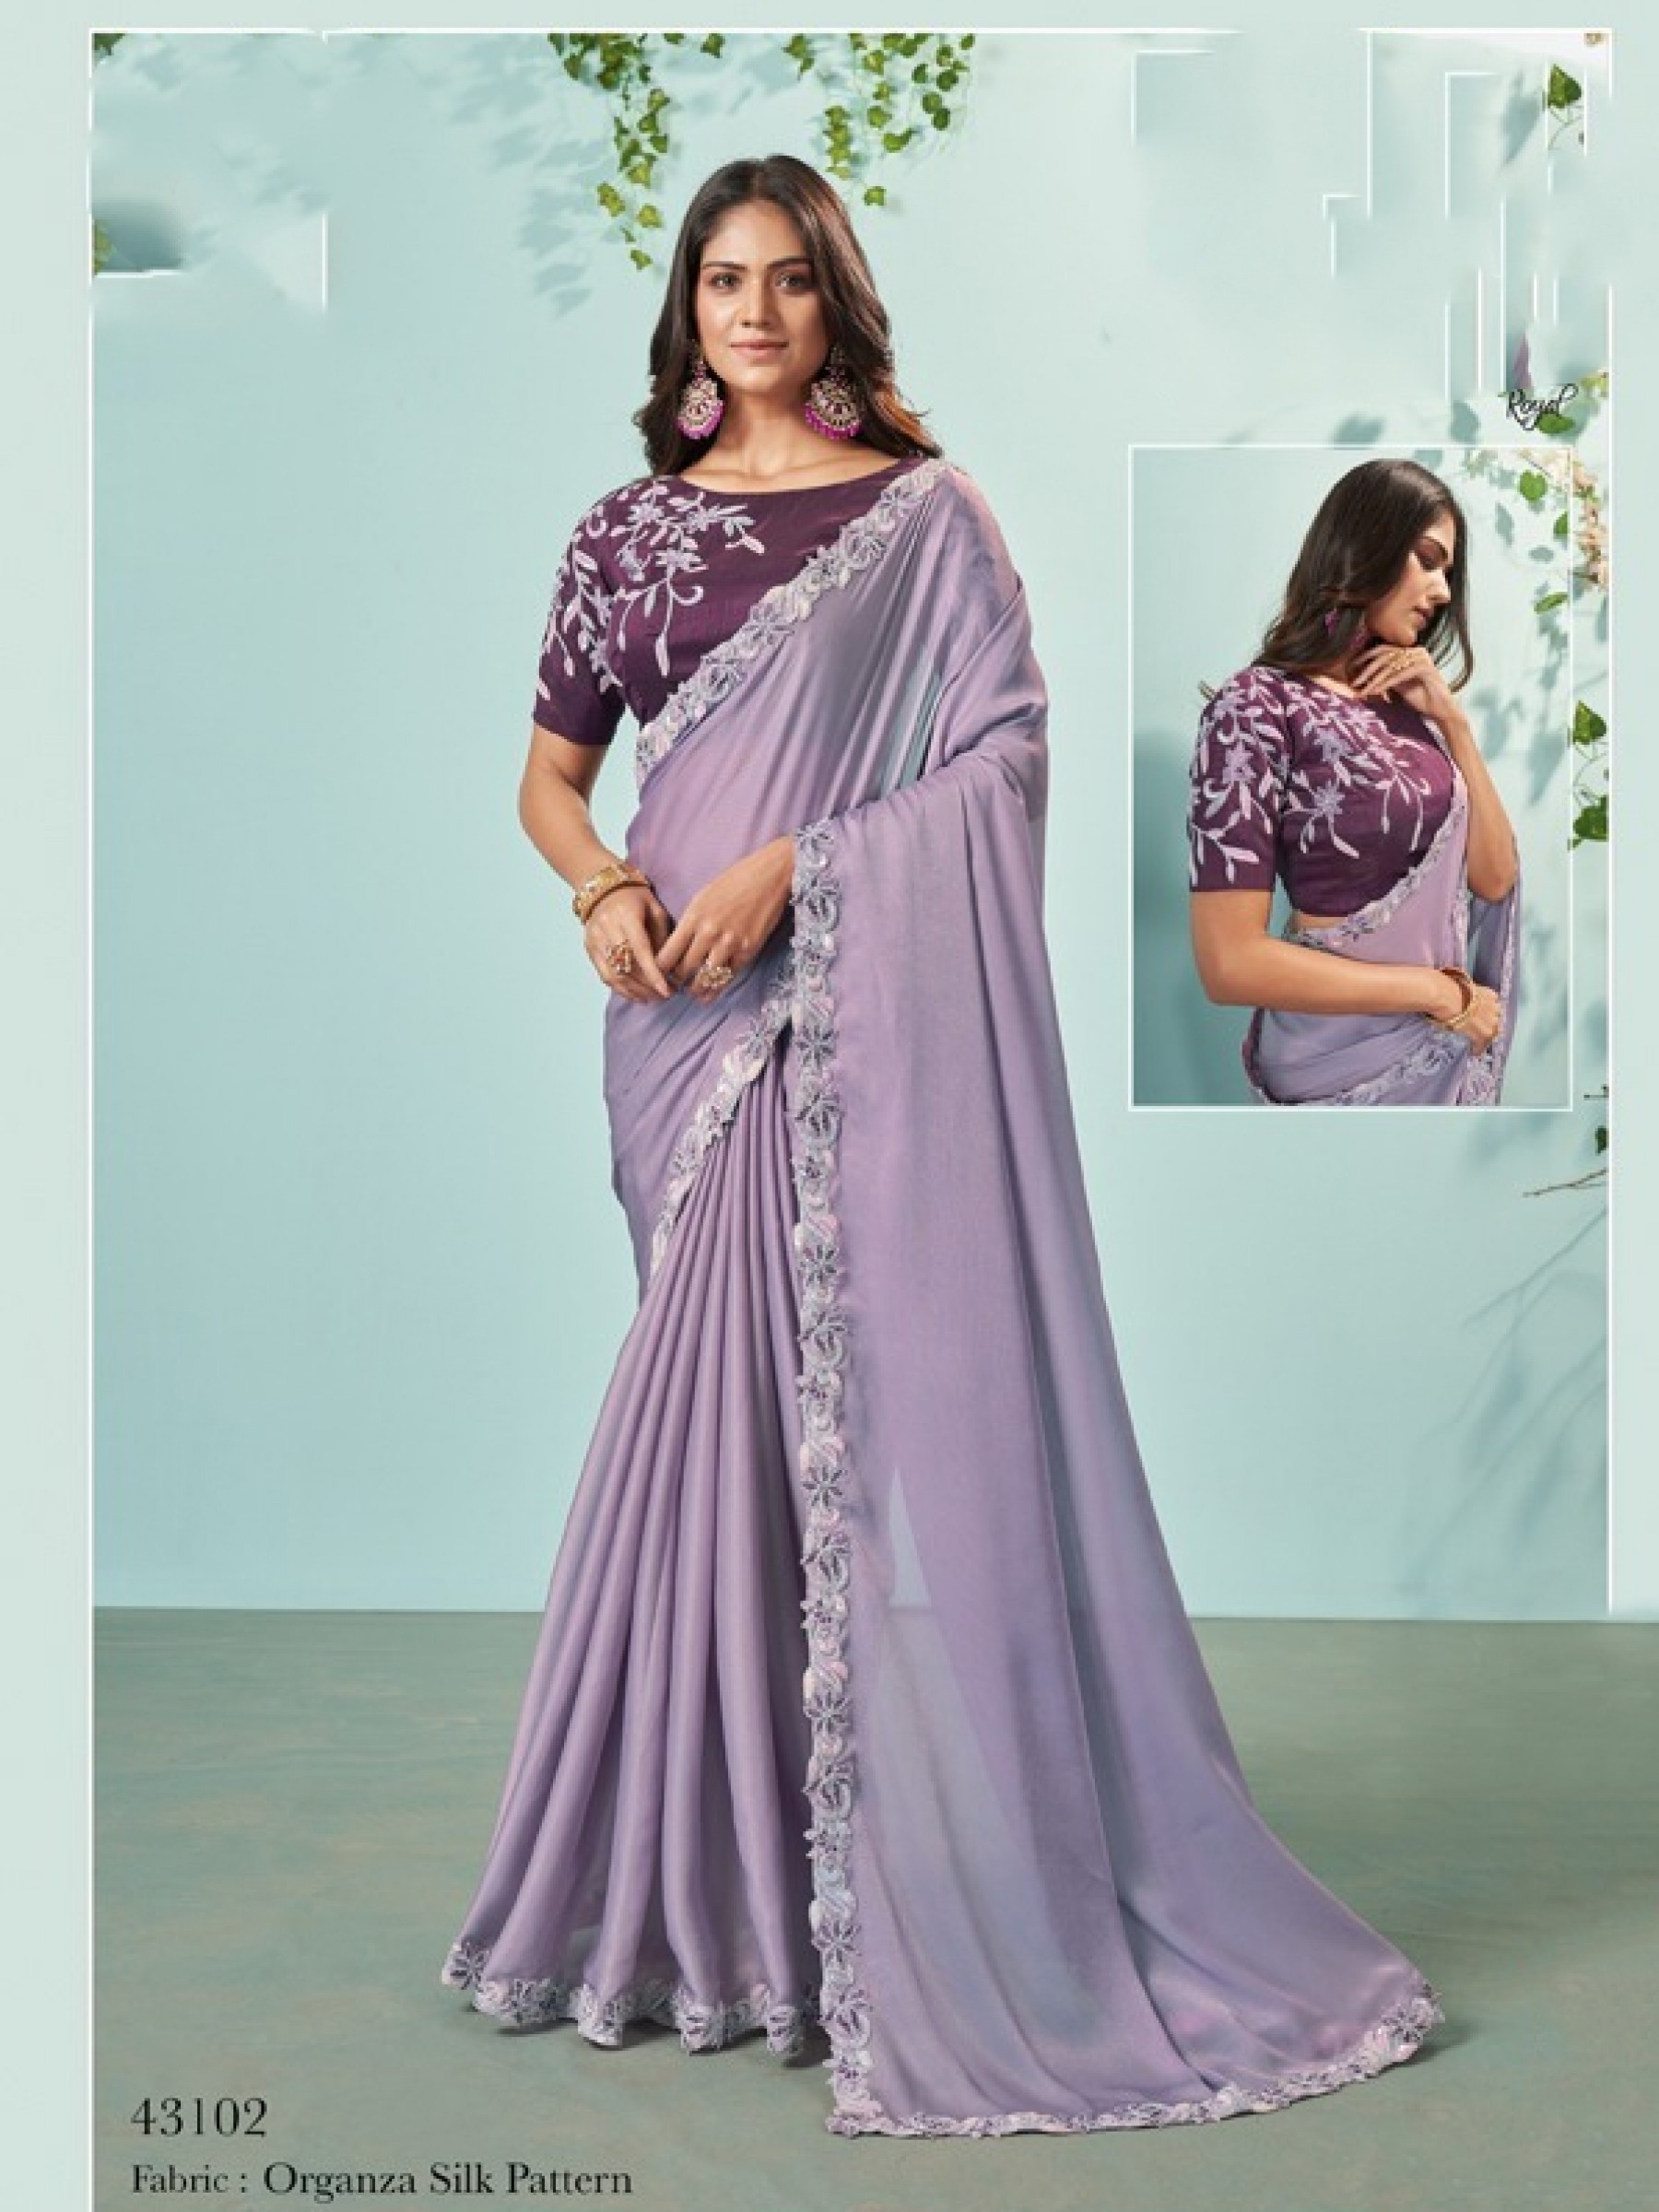 Organza Silk  Saree In Purple Color With Embroidery Work